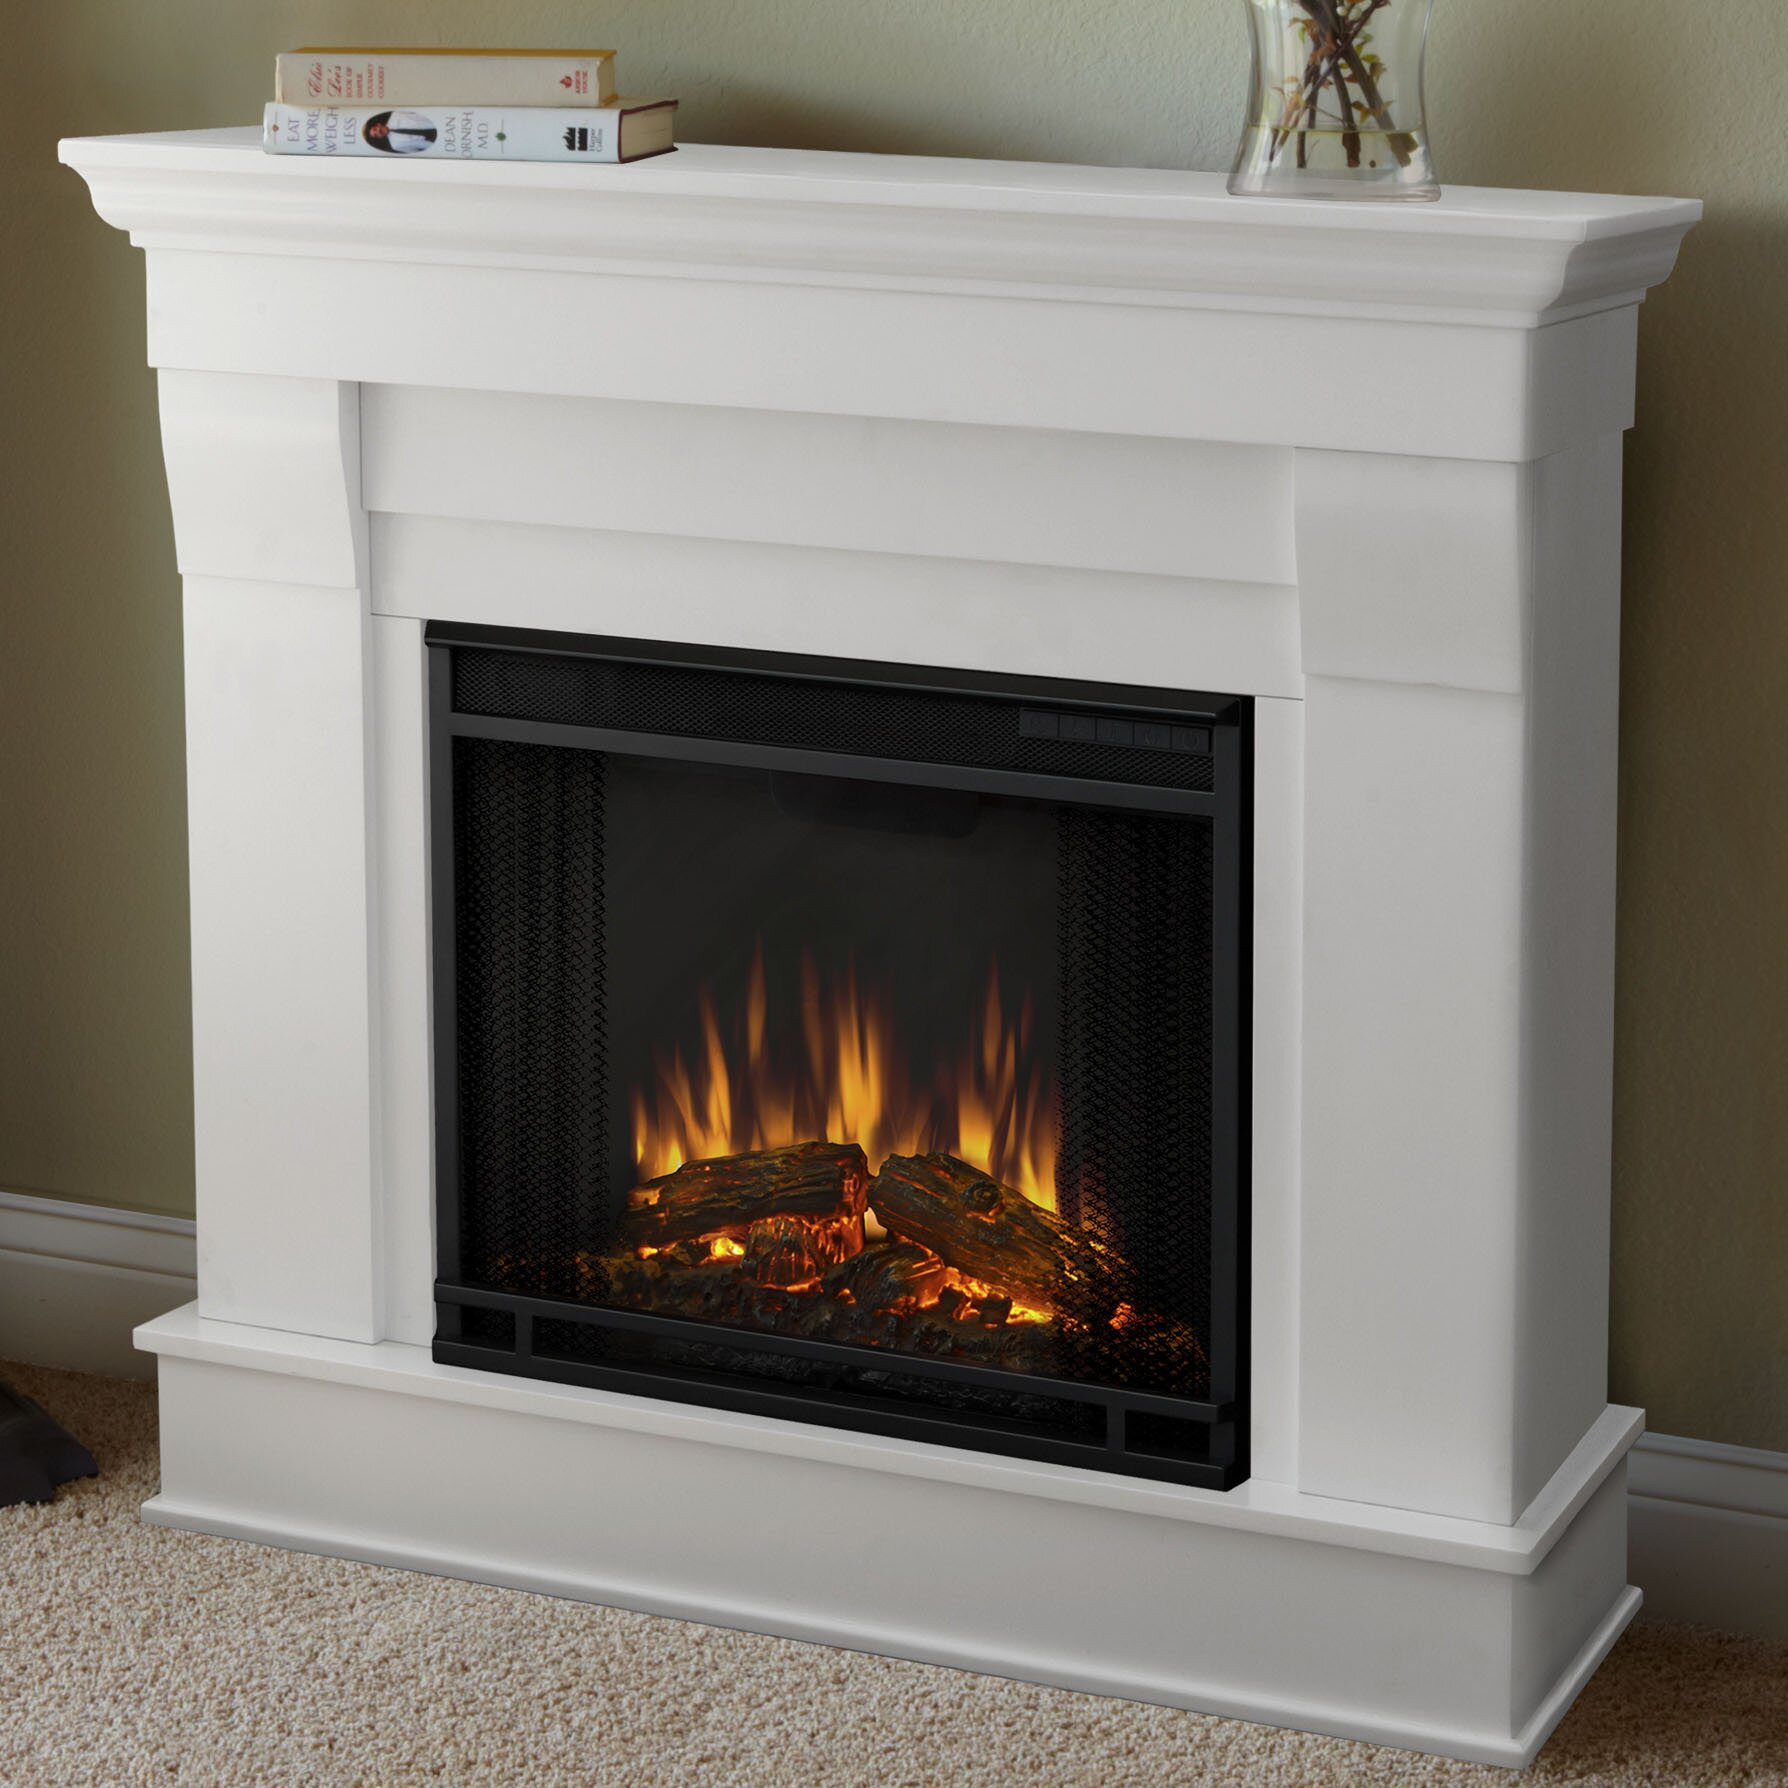 Real Flame Electric Fireplace Reviews
 Real Flame Chateau Electric Fireplace & Reviews